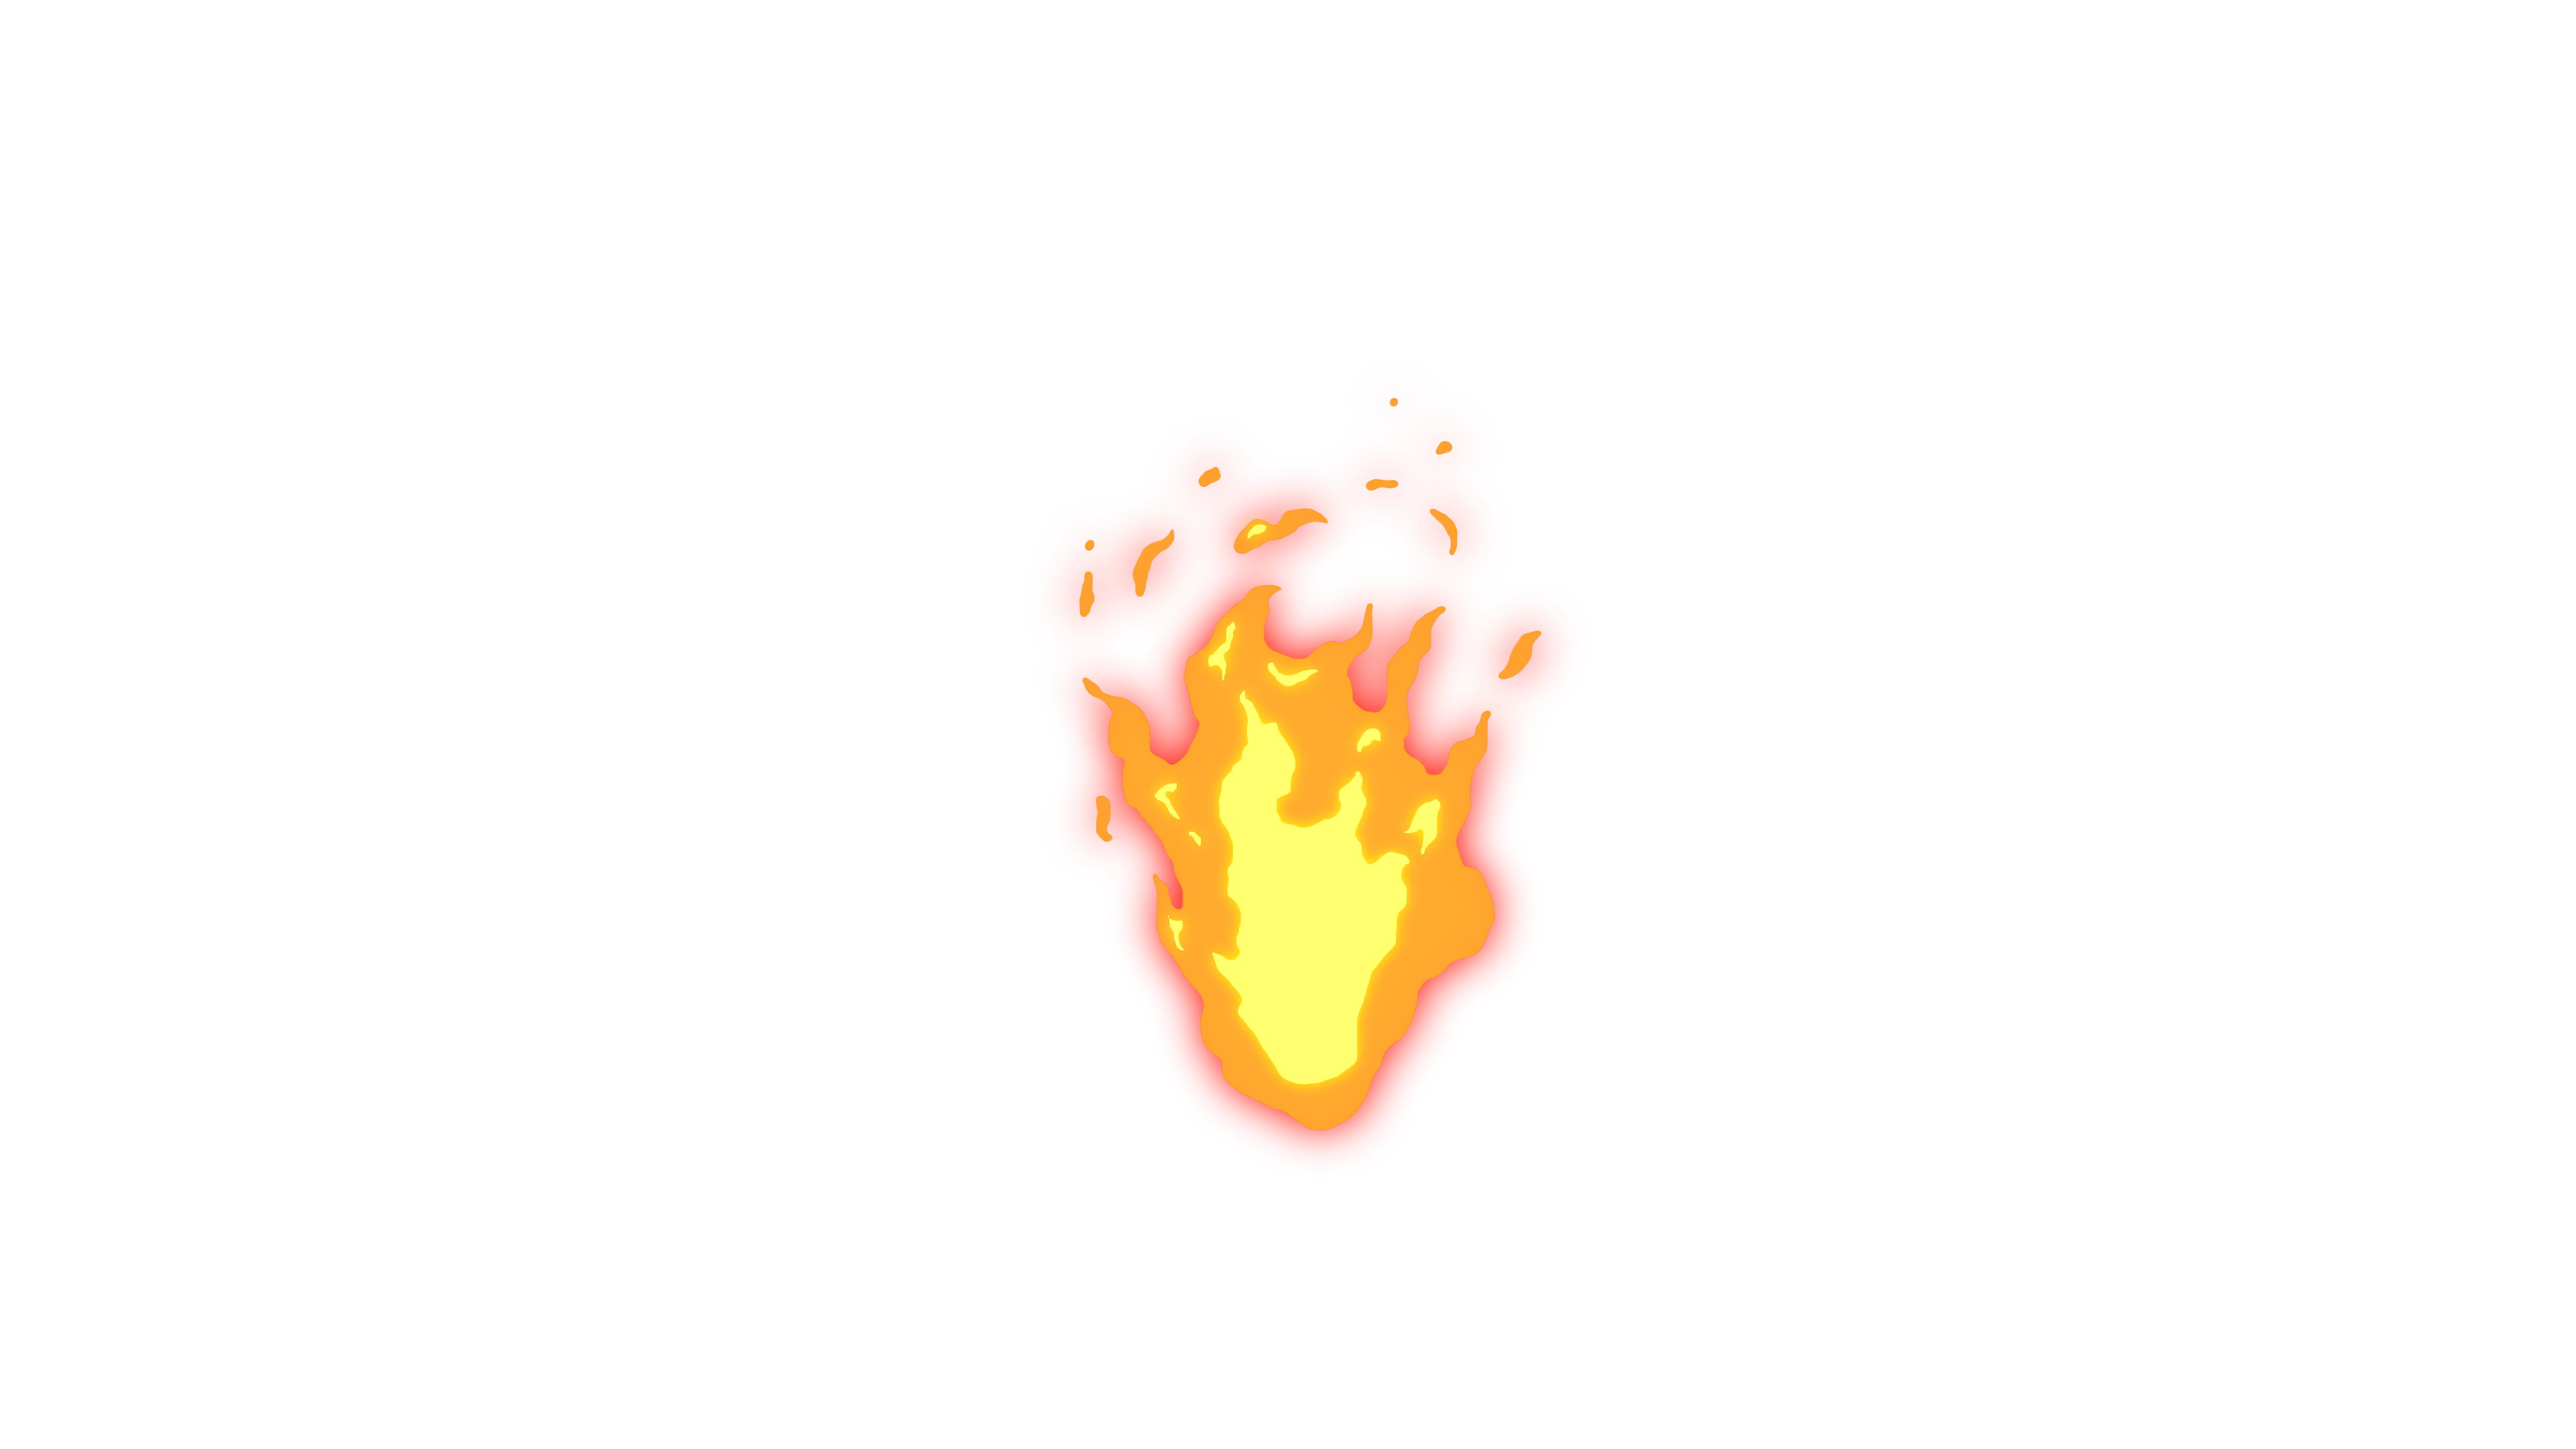 Anime Fire Vector Art, Icons, and Graphics for Free Download, site  animefire - thirstymag.com